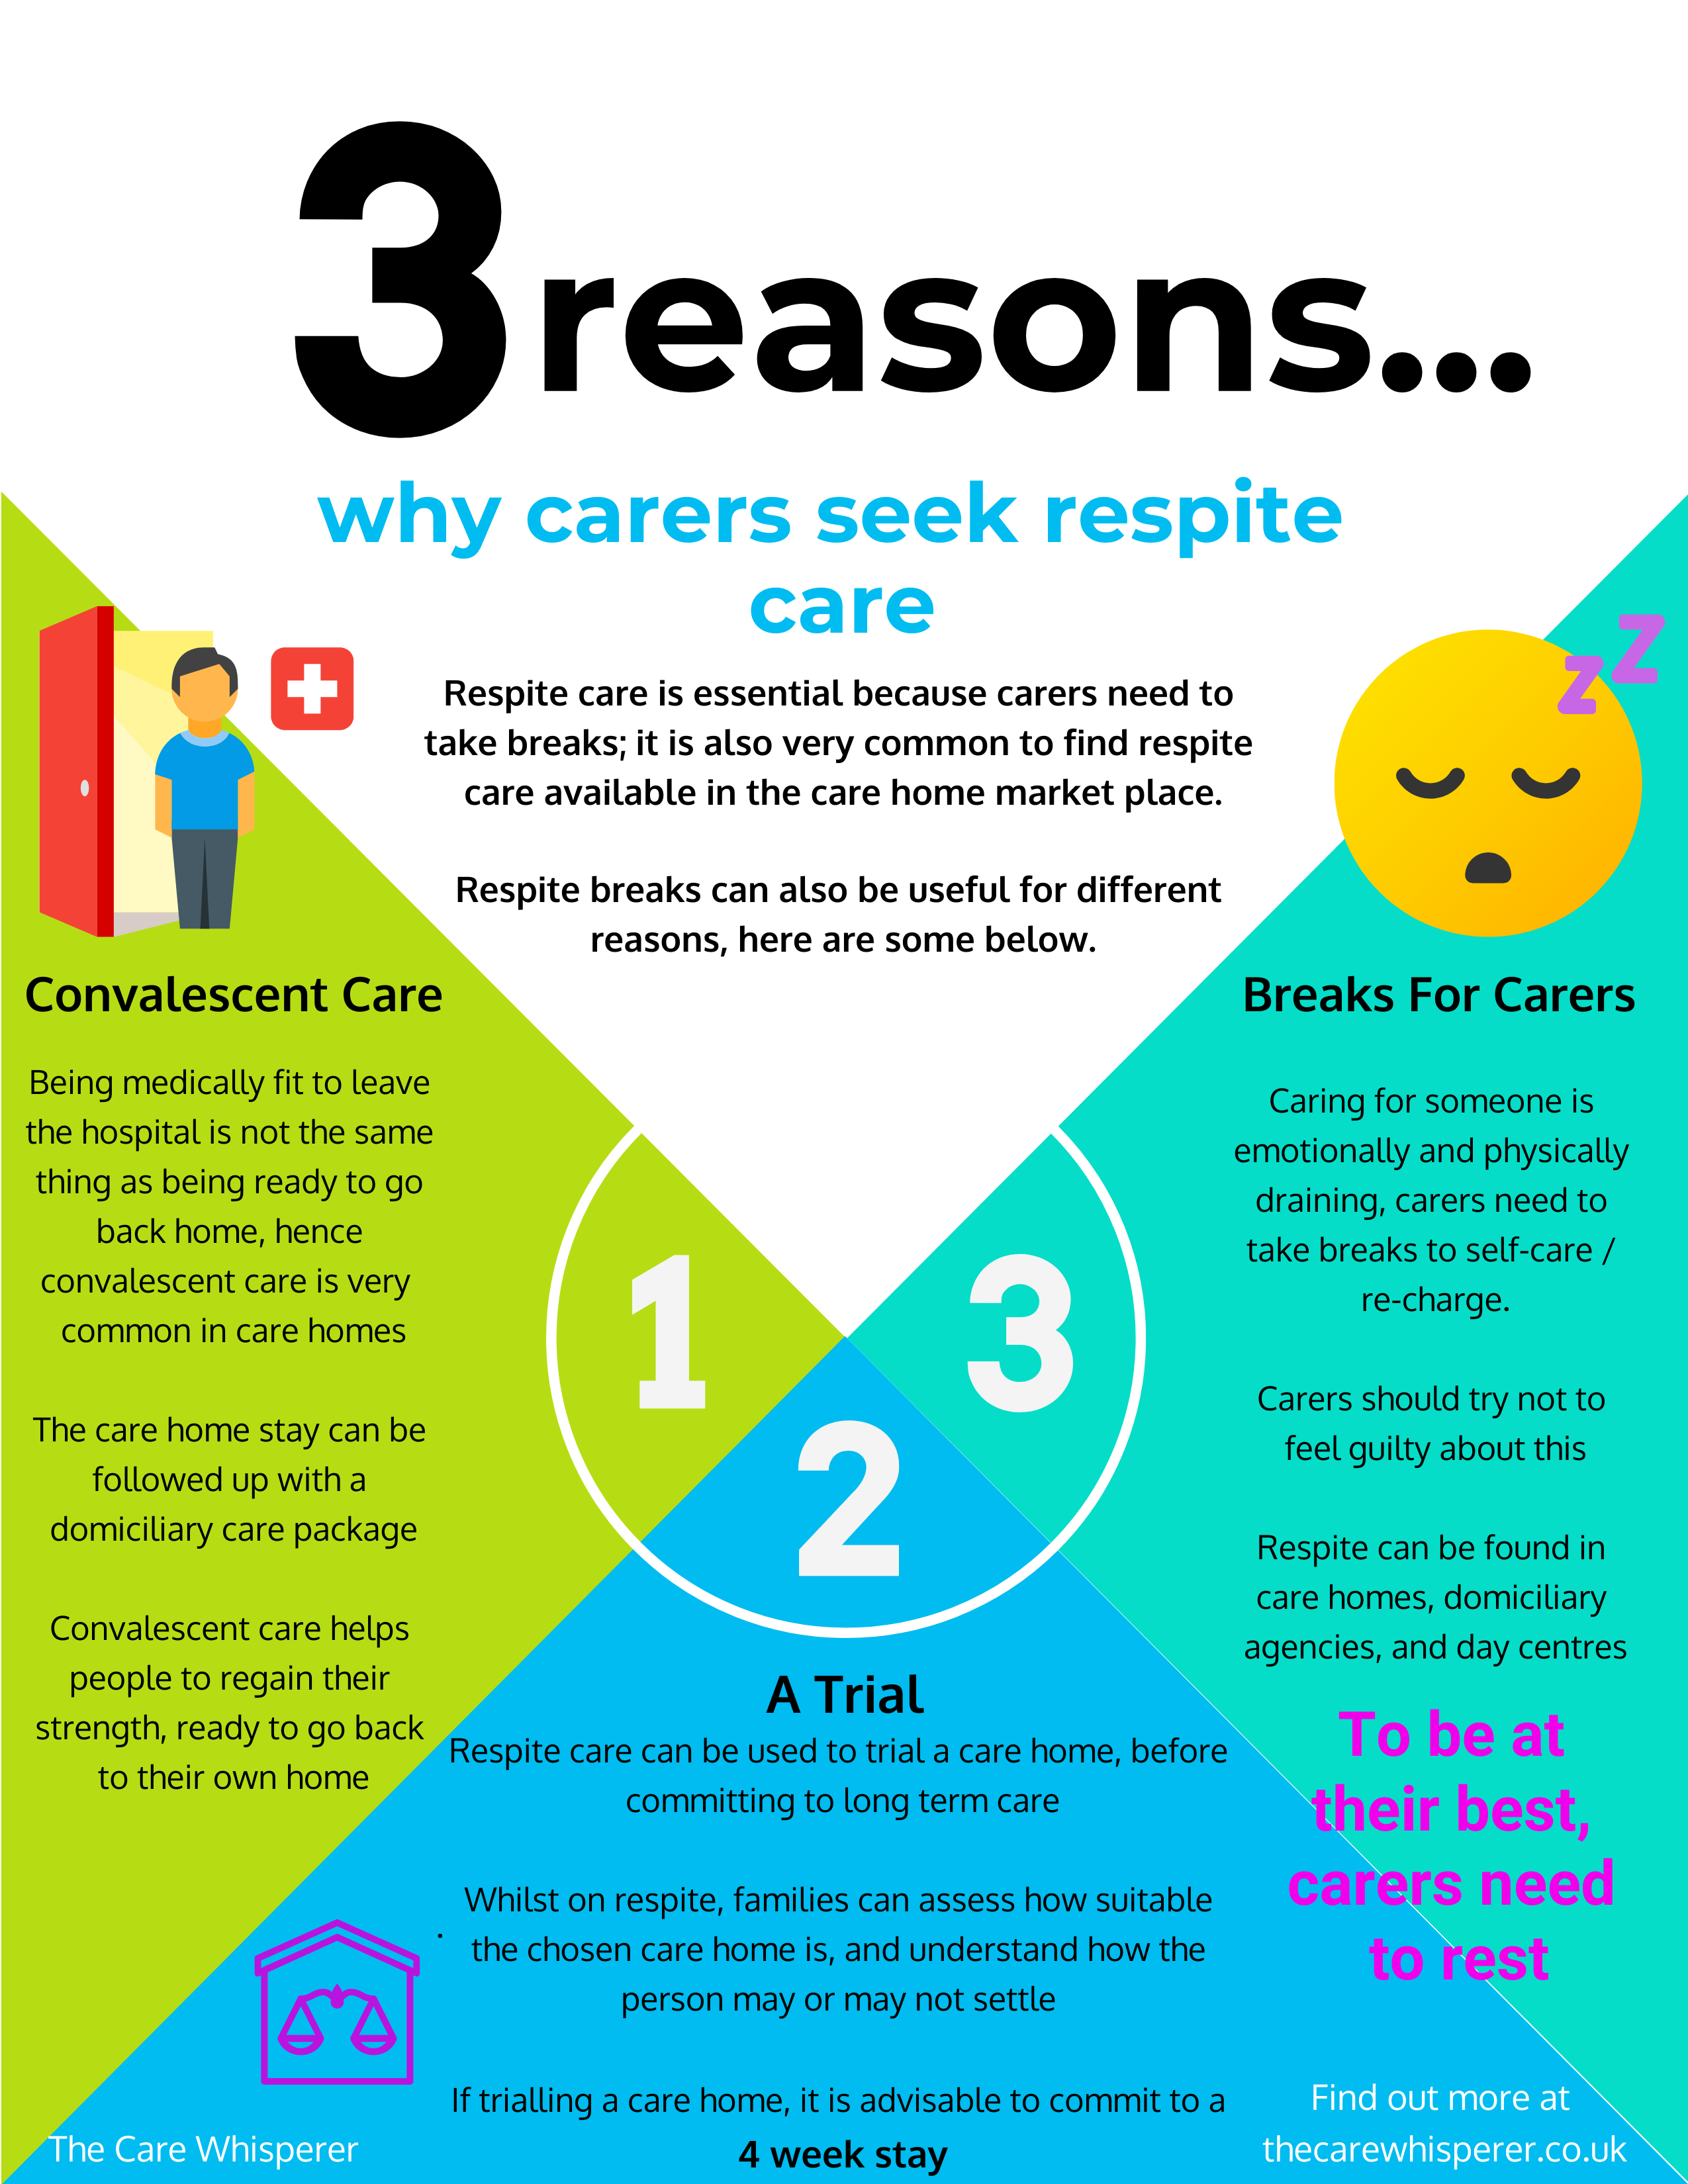 Post No51...3 reasons carers seek respite care - Infographic